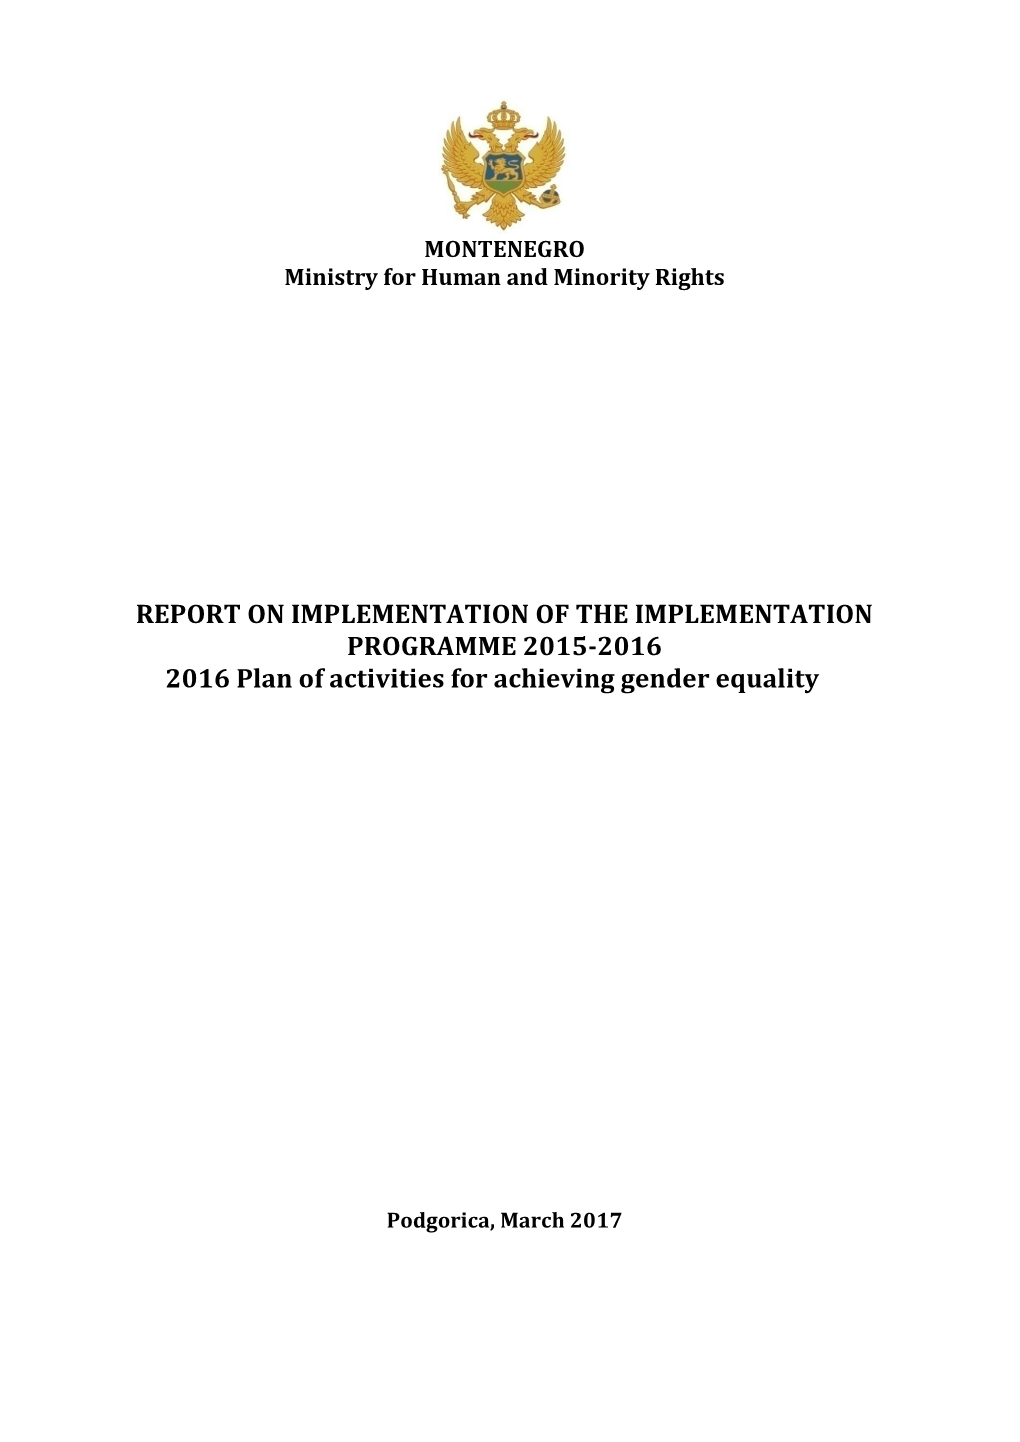 REPORT on IMPLEMENTATION of the IMPLEMENTATION PROGRAMME 2015-2016 2016 Plan of Activities for Achieving Gender Equality